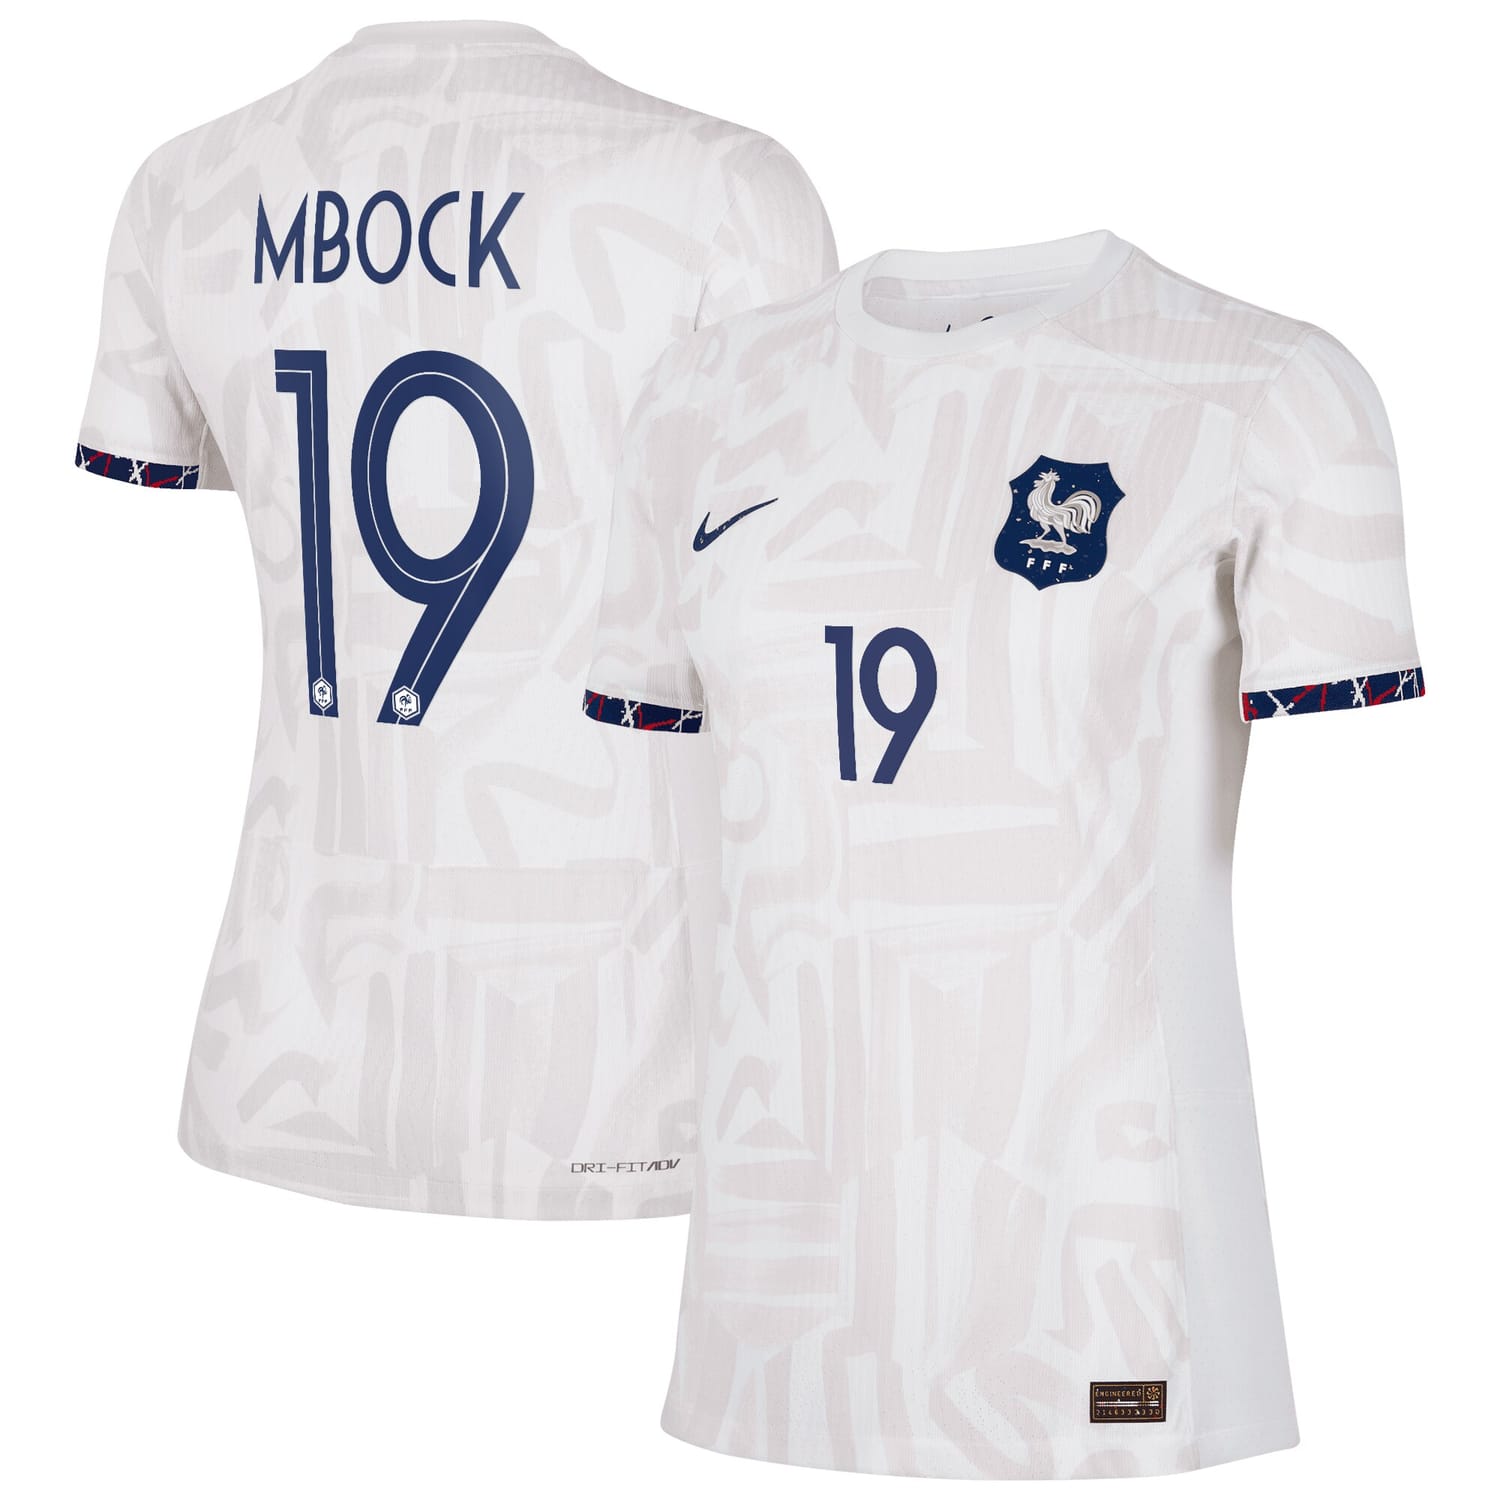 France National Team Away Authentic Jersey Shirt 2023-24 player Griedge Mbock 19 printing for Women